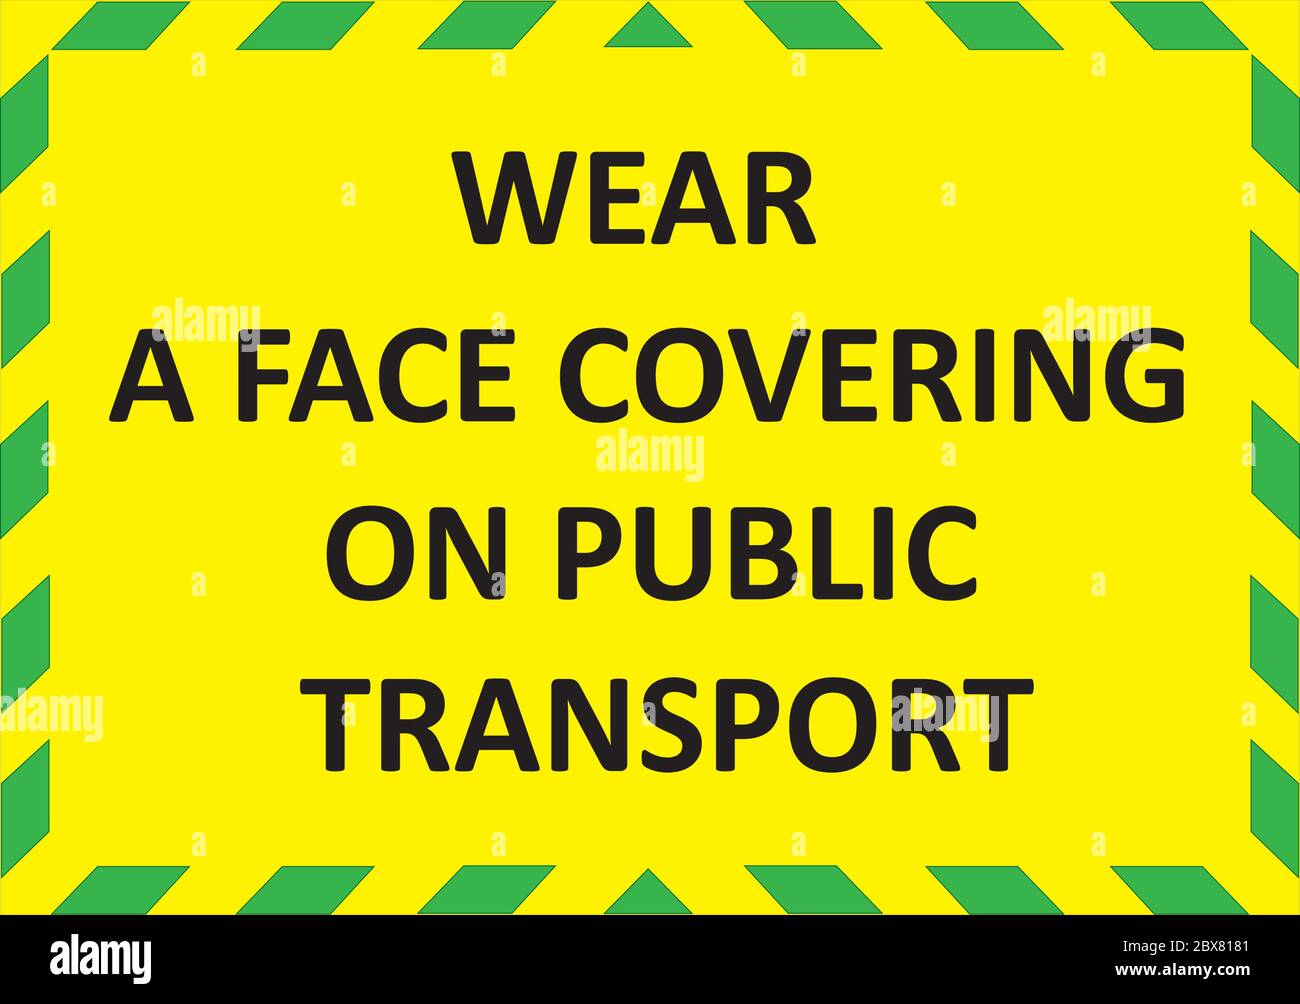 WEAR A FACE COVERING ON PUBLIC TRANSPORT warning sign. Yellow and green quarantine sign that help to battle against Covid-19 in England. Vector. Stock Vector